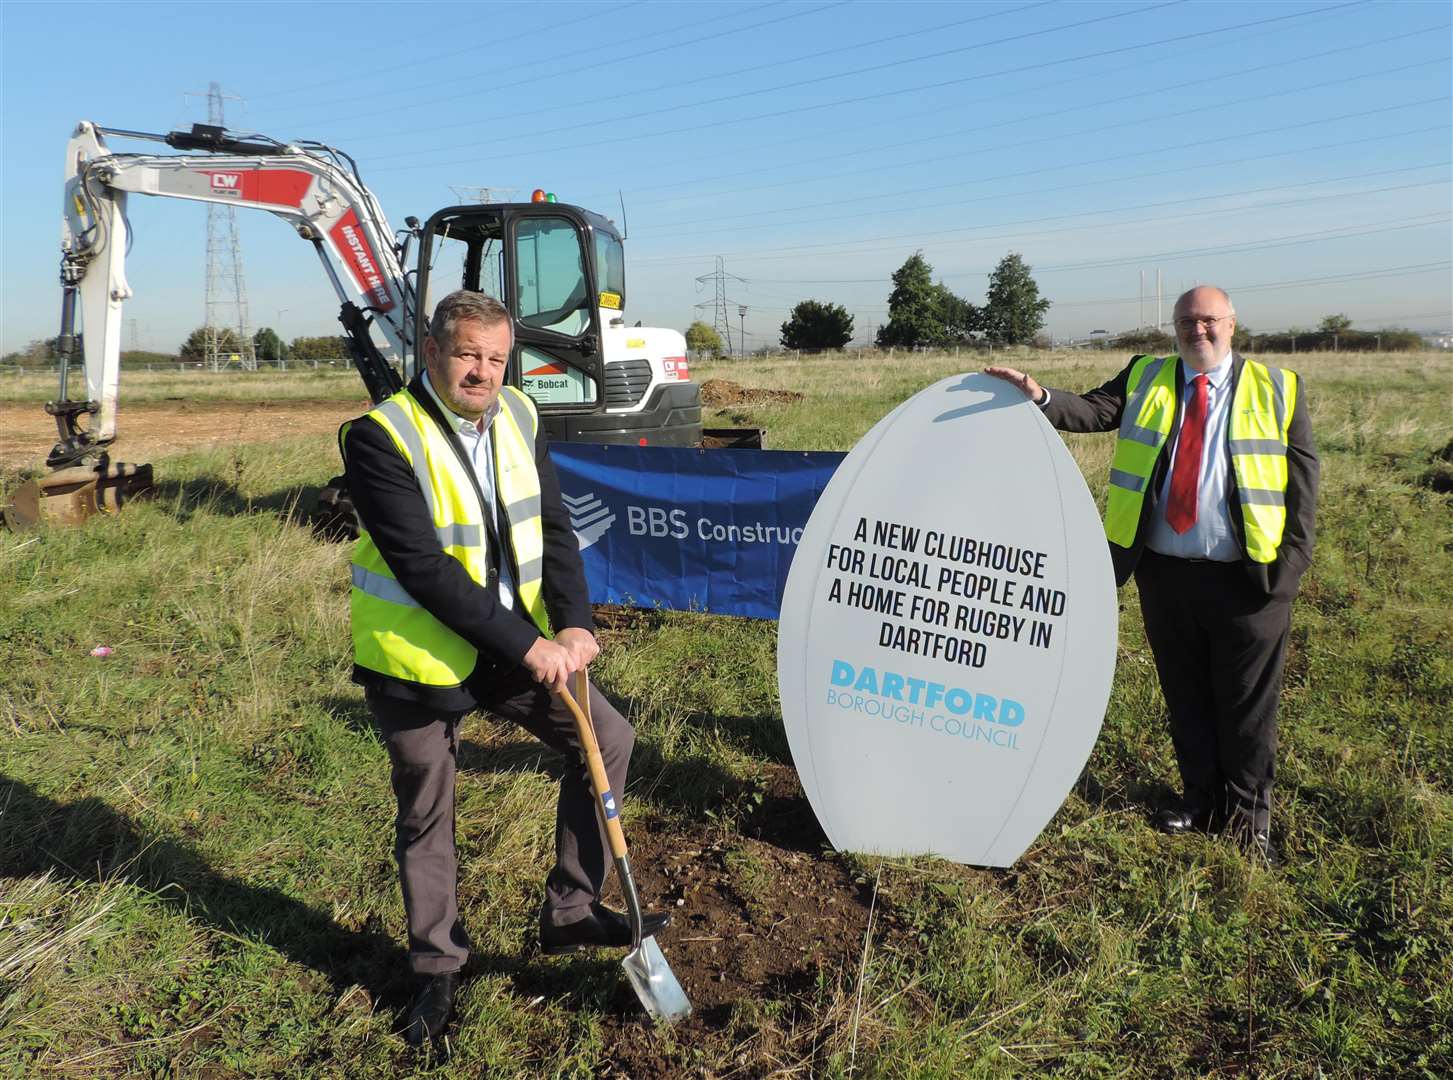 Work has started on the club, deputy council Leader Chris Shippam (left) and council Leader Jeremy Kite (right) on site